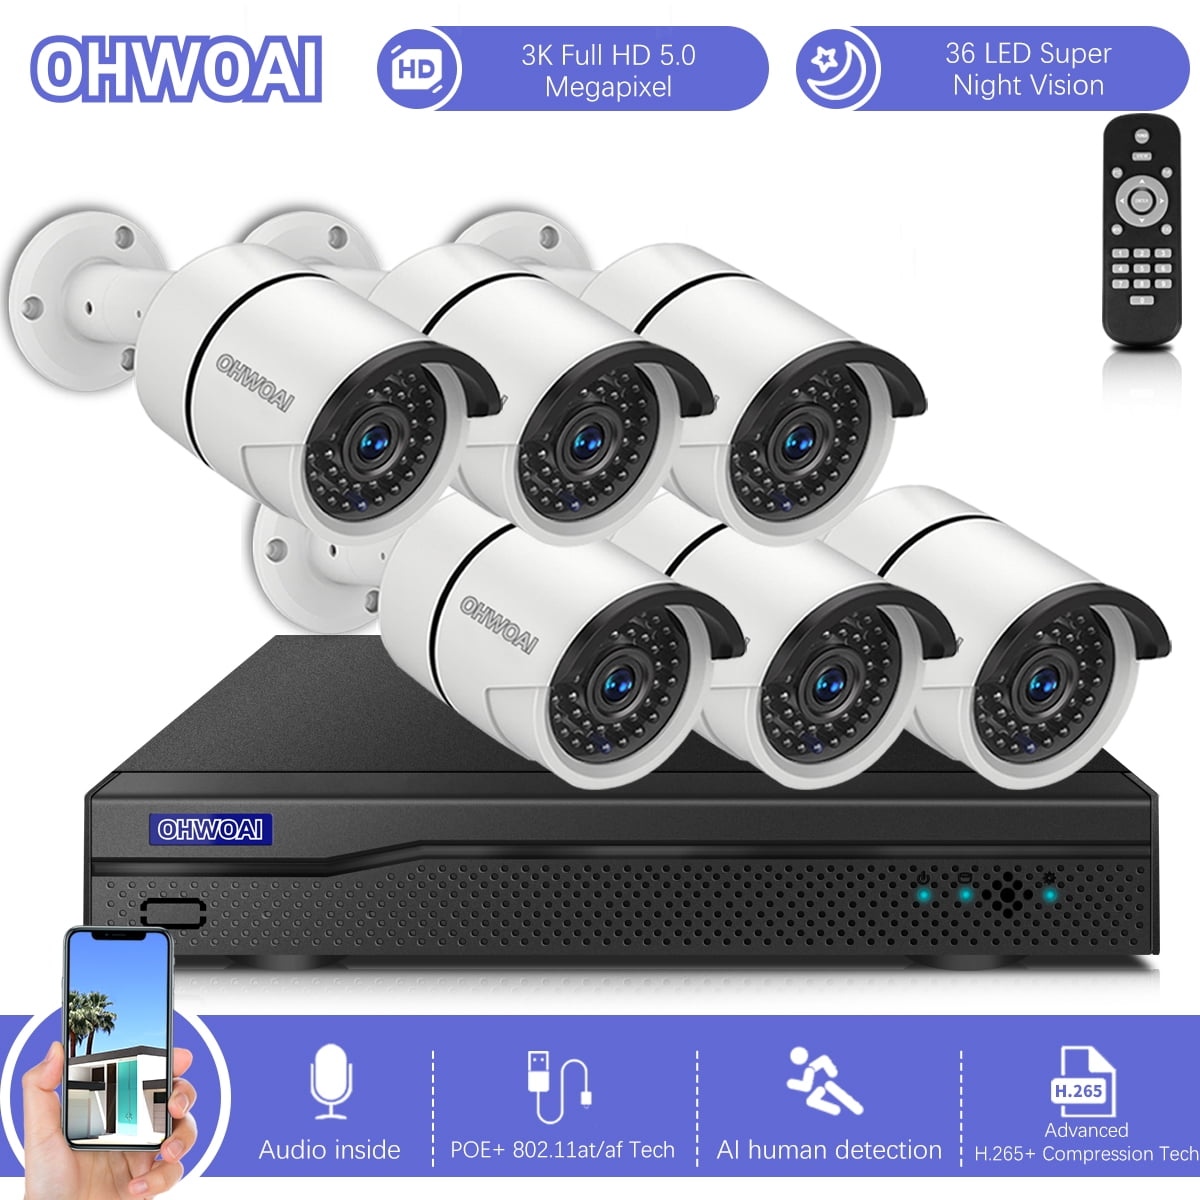 Outdoor&Indoor Home Security Cameras,65ft Night Vision,P2P,Easy Remote View 2TB Hard Drive 【2019 NEW】1080P CCTV Camera Systems,SMONET 8-Channel 1080P 5-in-1 Security Camera Systems 2.0MP ,8pcs 1080P